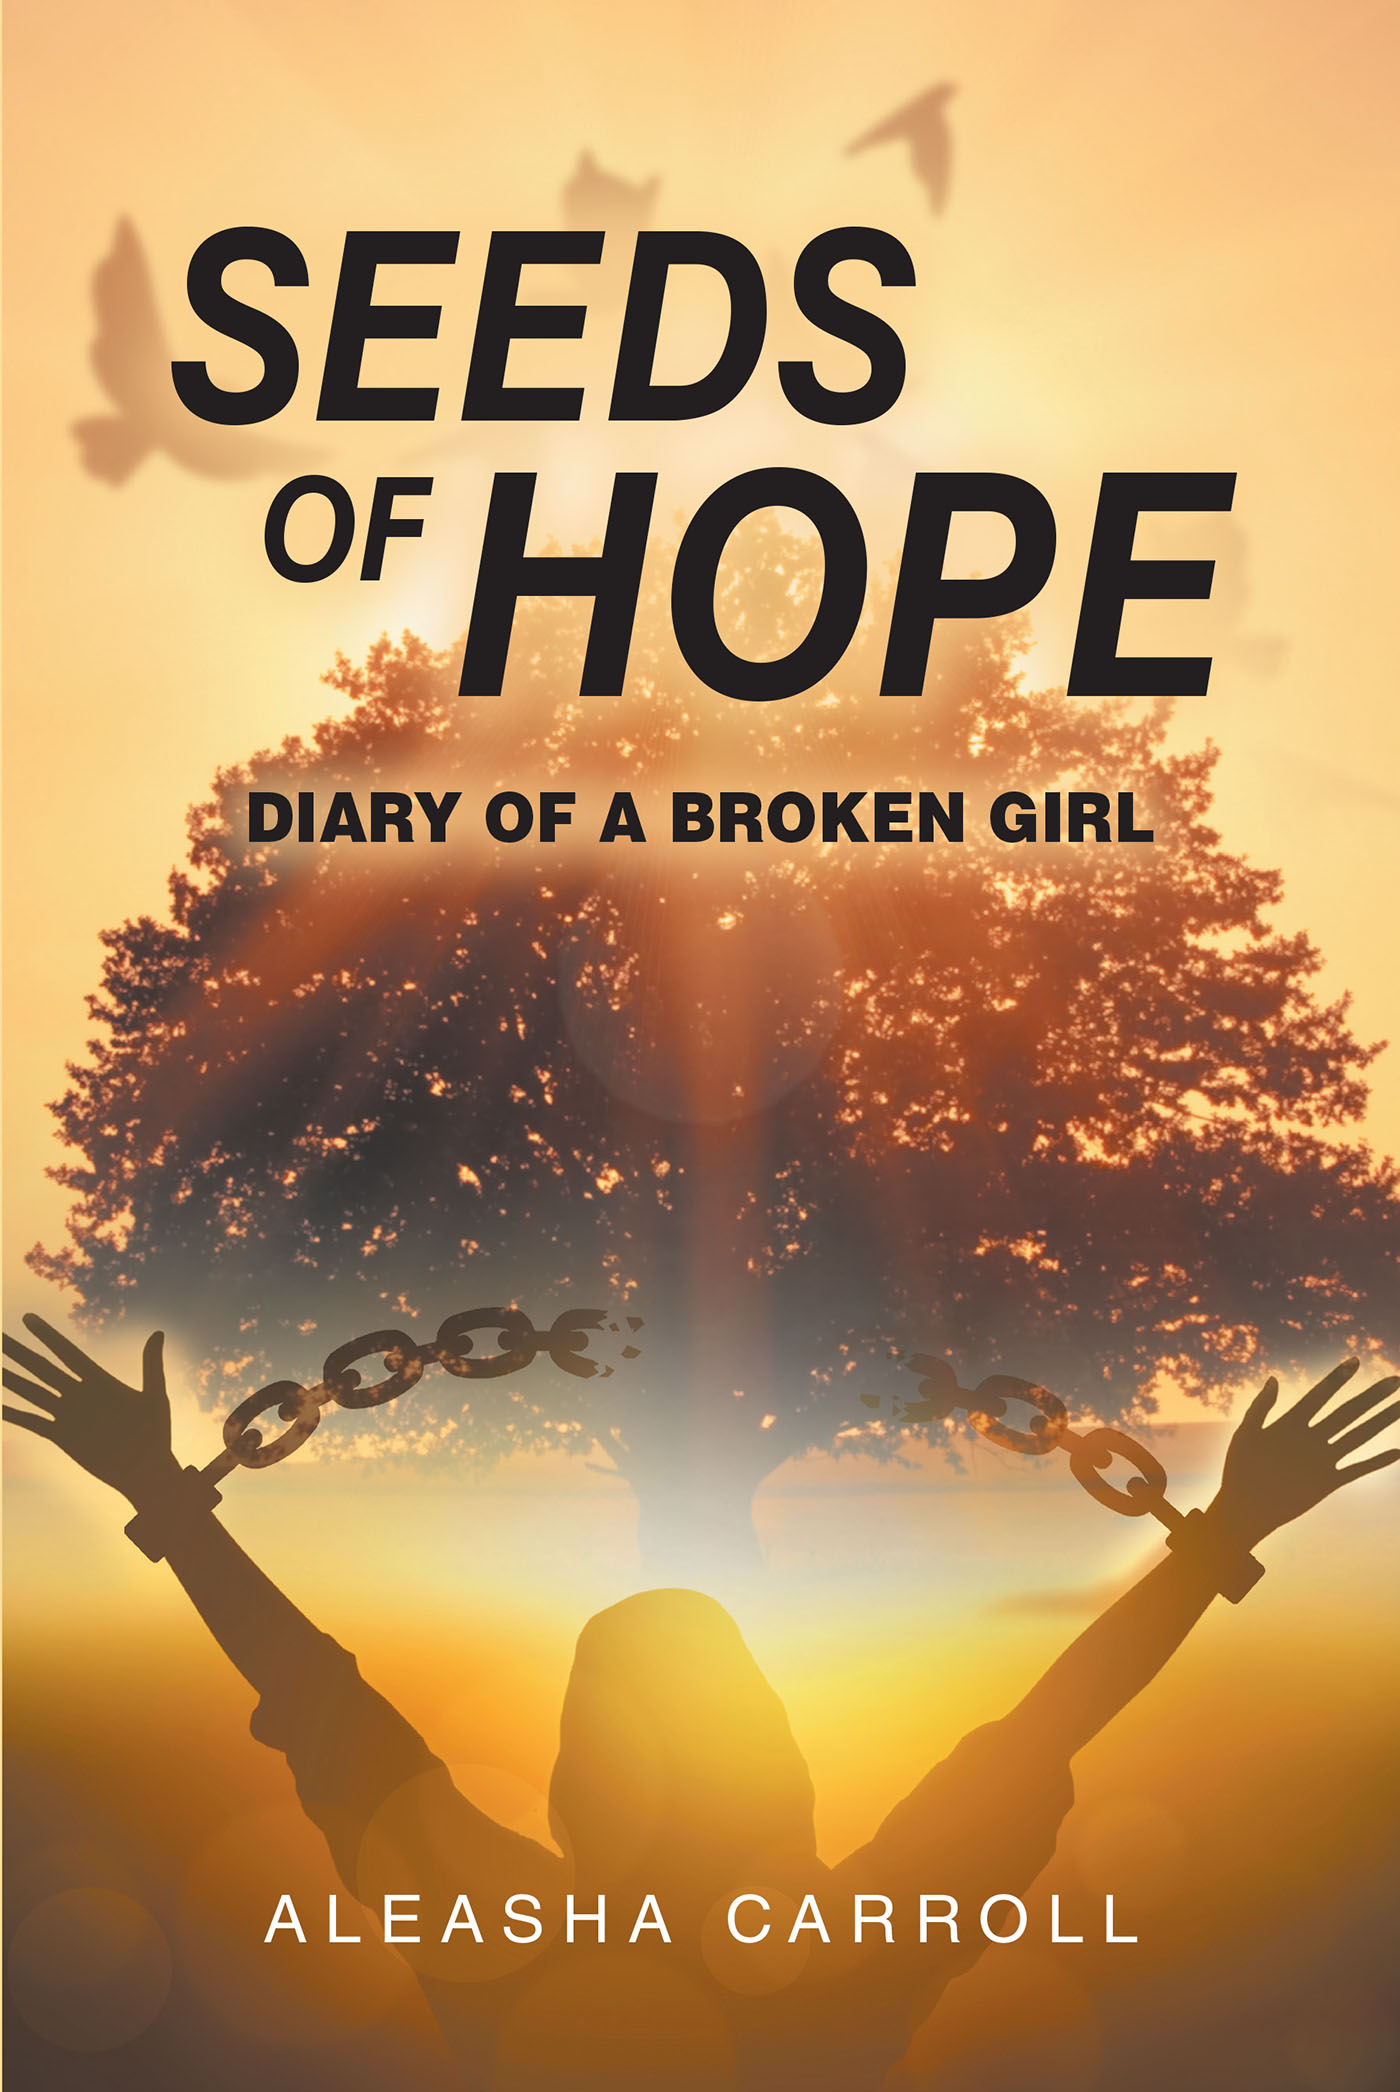 Aleasha Carroll’s Newly Released “Seeds Of Hope: Diary of a Broken Girl” is an Emotionally Charged Memoir That Shares a Message of Hope